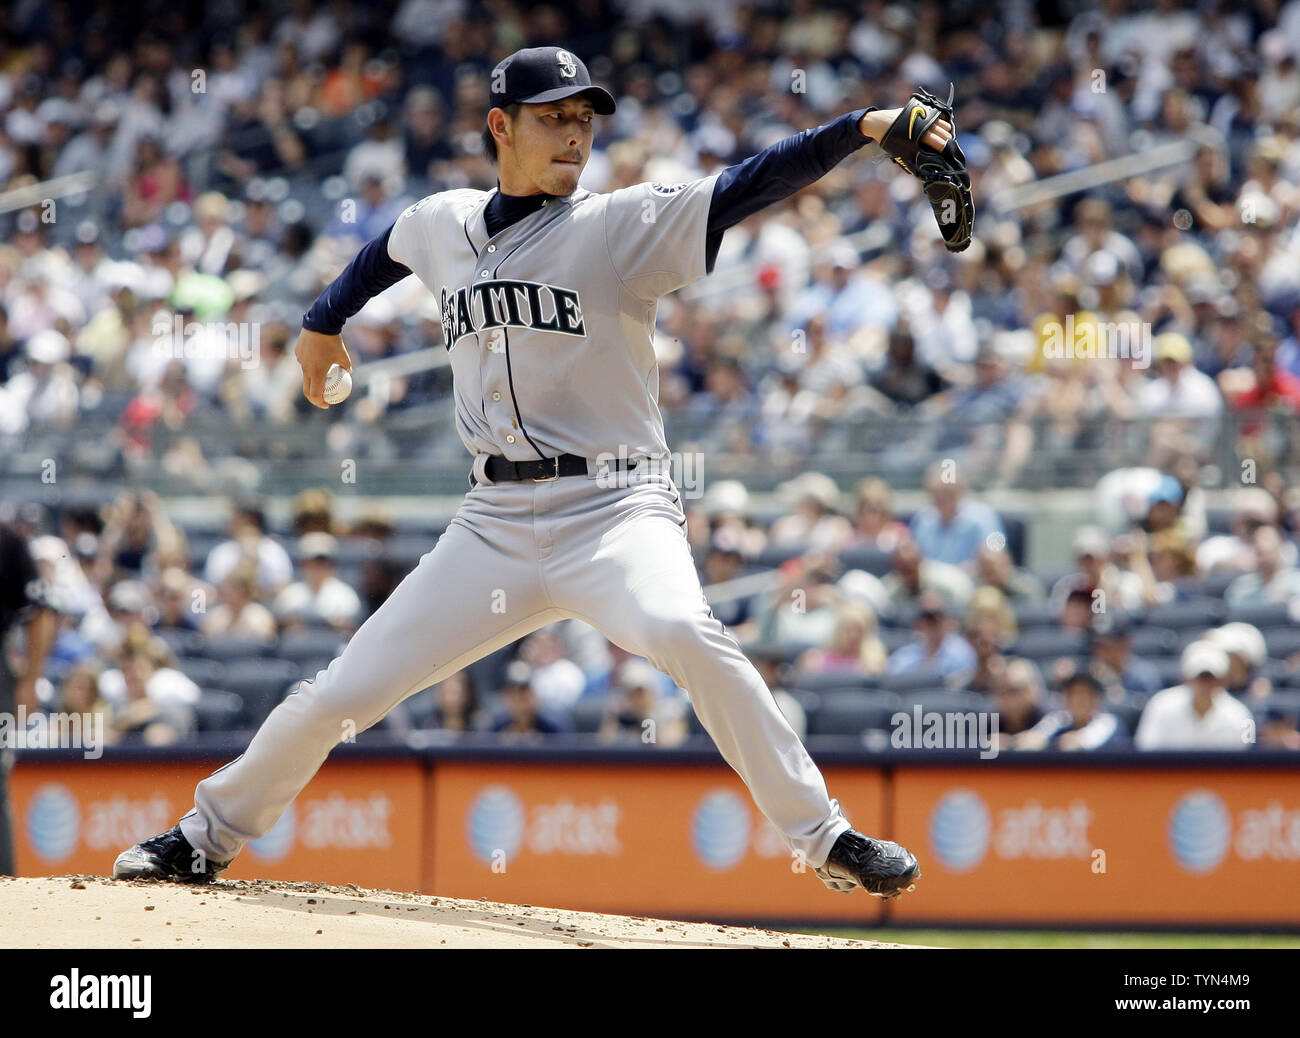 Seattle Mariners starting pitcher Hisashi Iwakuma throws a pitch in the first inning against the New York Yankees at Yankee Stadium in New York City on August 5, 2012.     UPI/John Angelillo Stock Photo